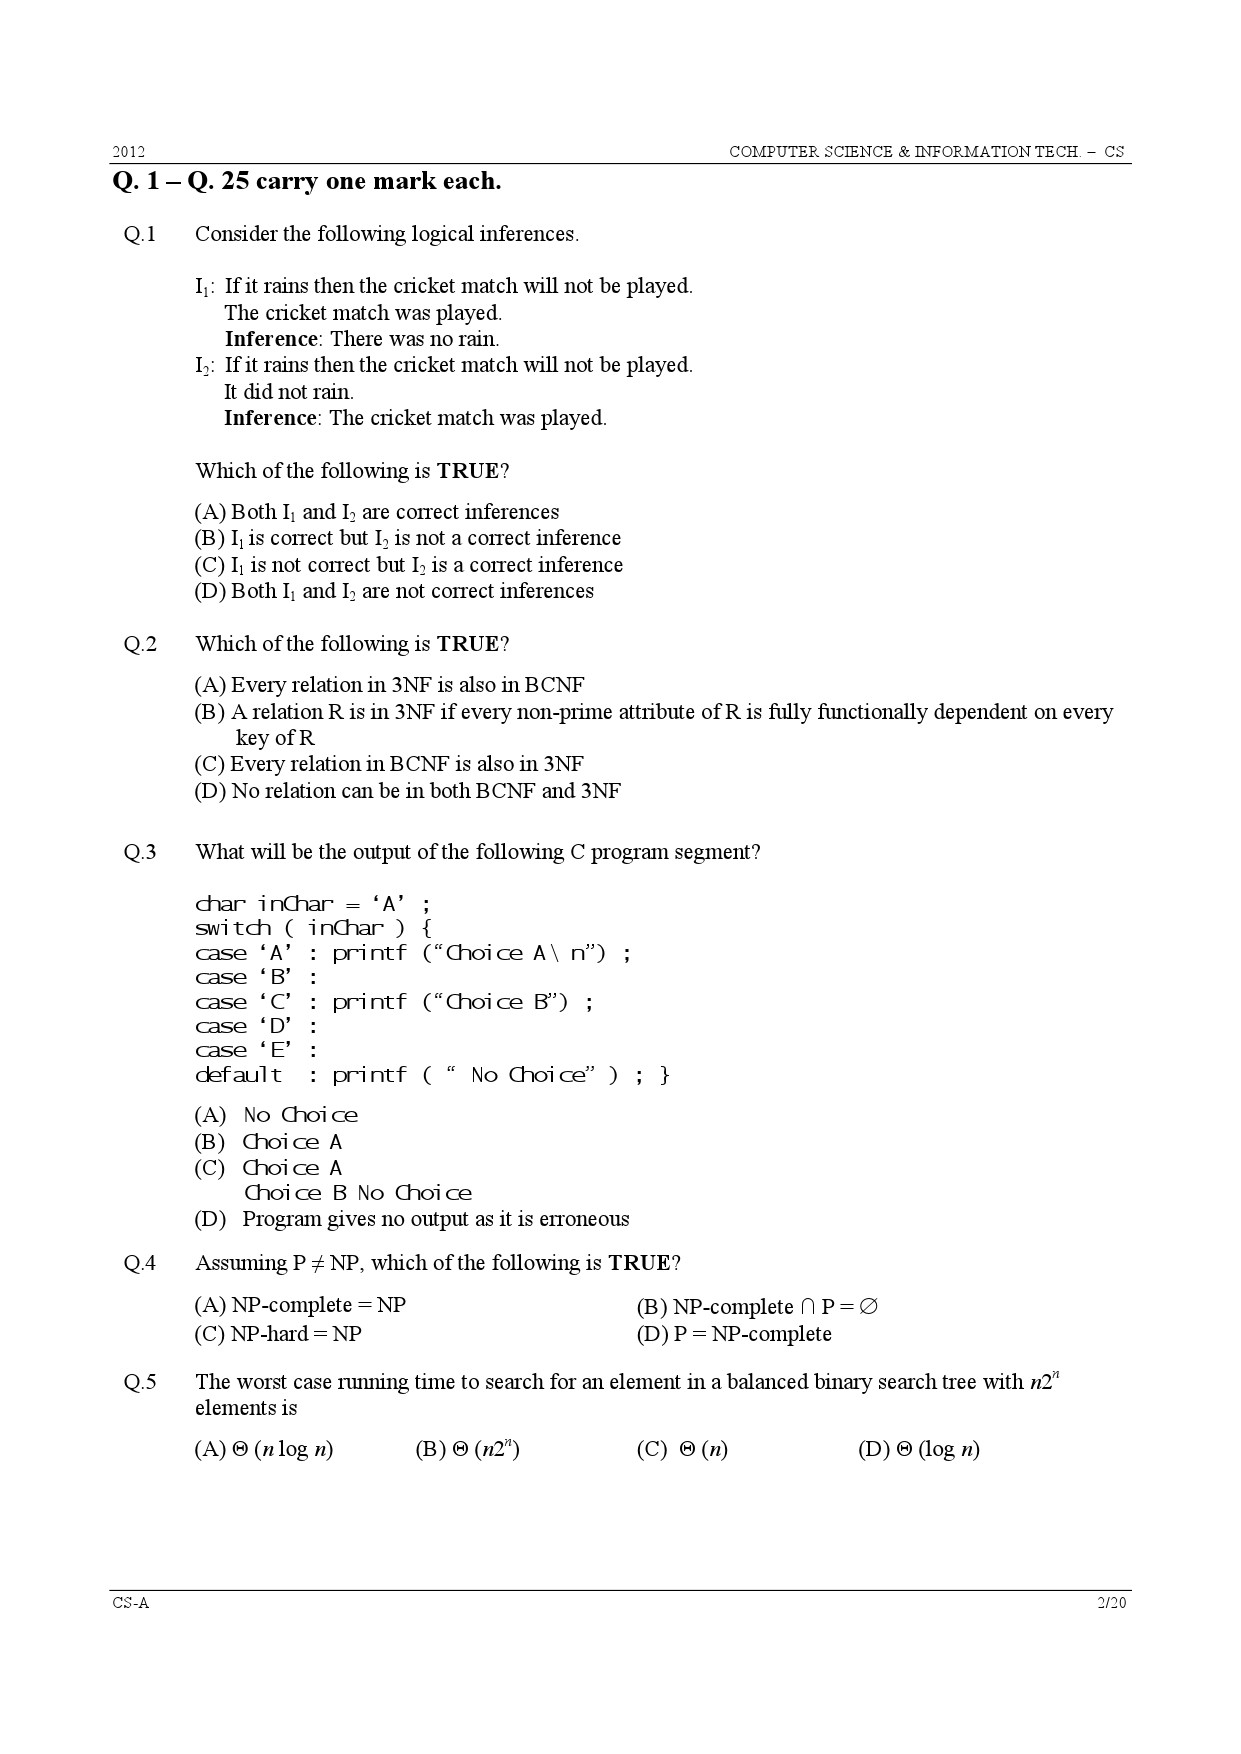 GATE Exam Question Paper 2012 Computer Science and Information Technology 2